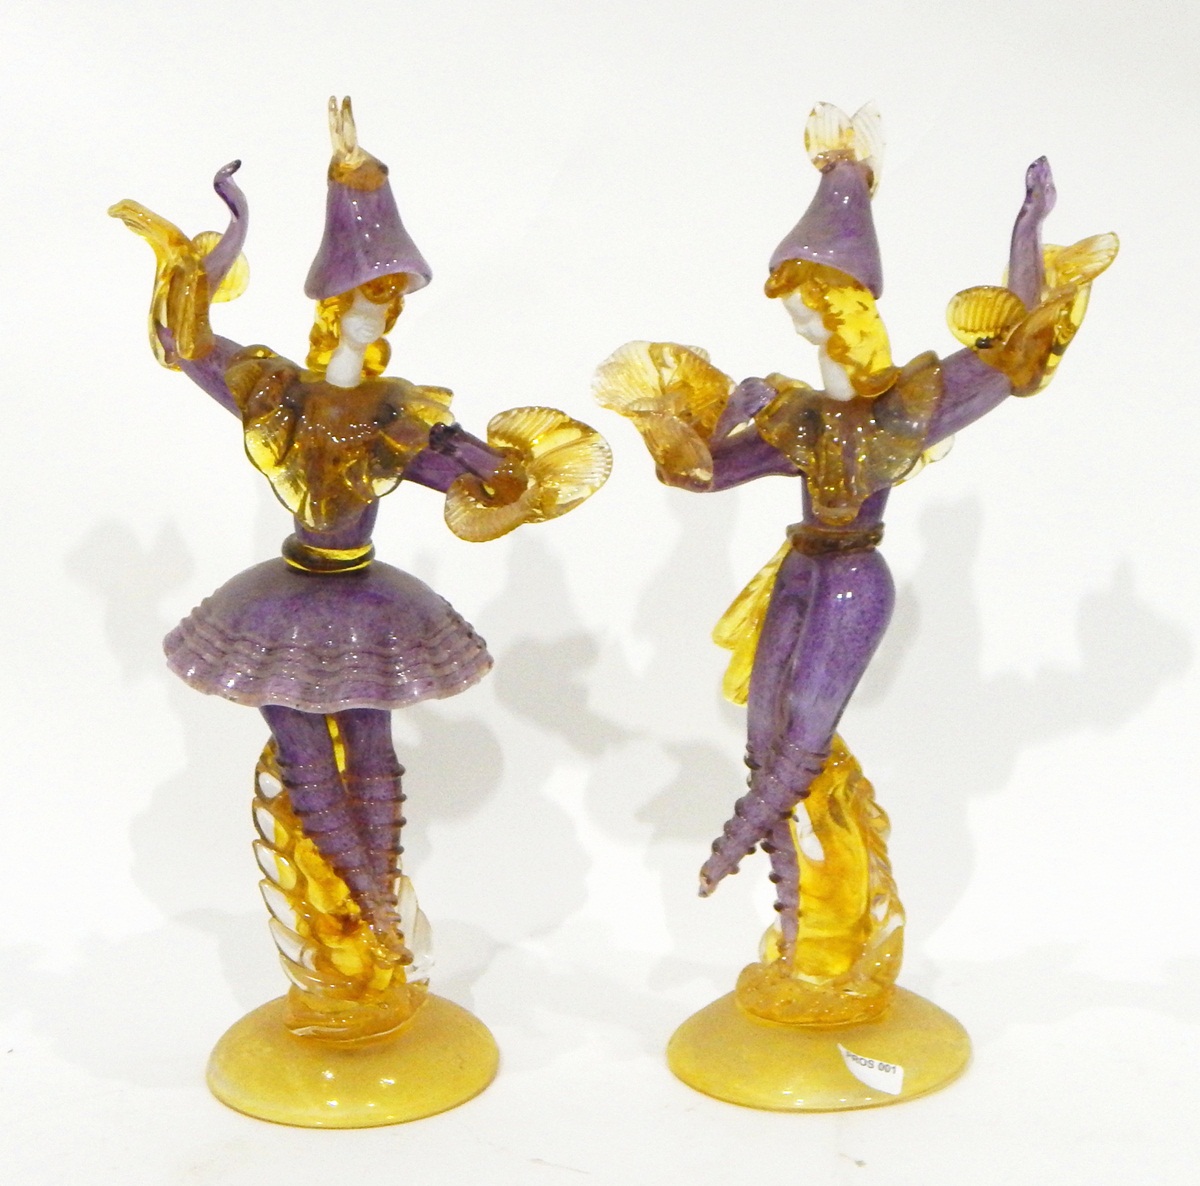 Set of four Murano glass figures by Franco Toffolo, in elaborate purple dress with gold detailing, - Image 3 of 3